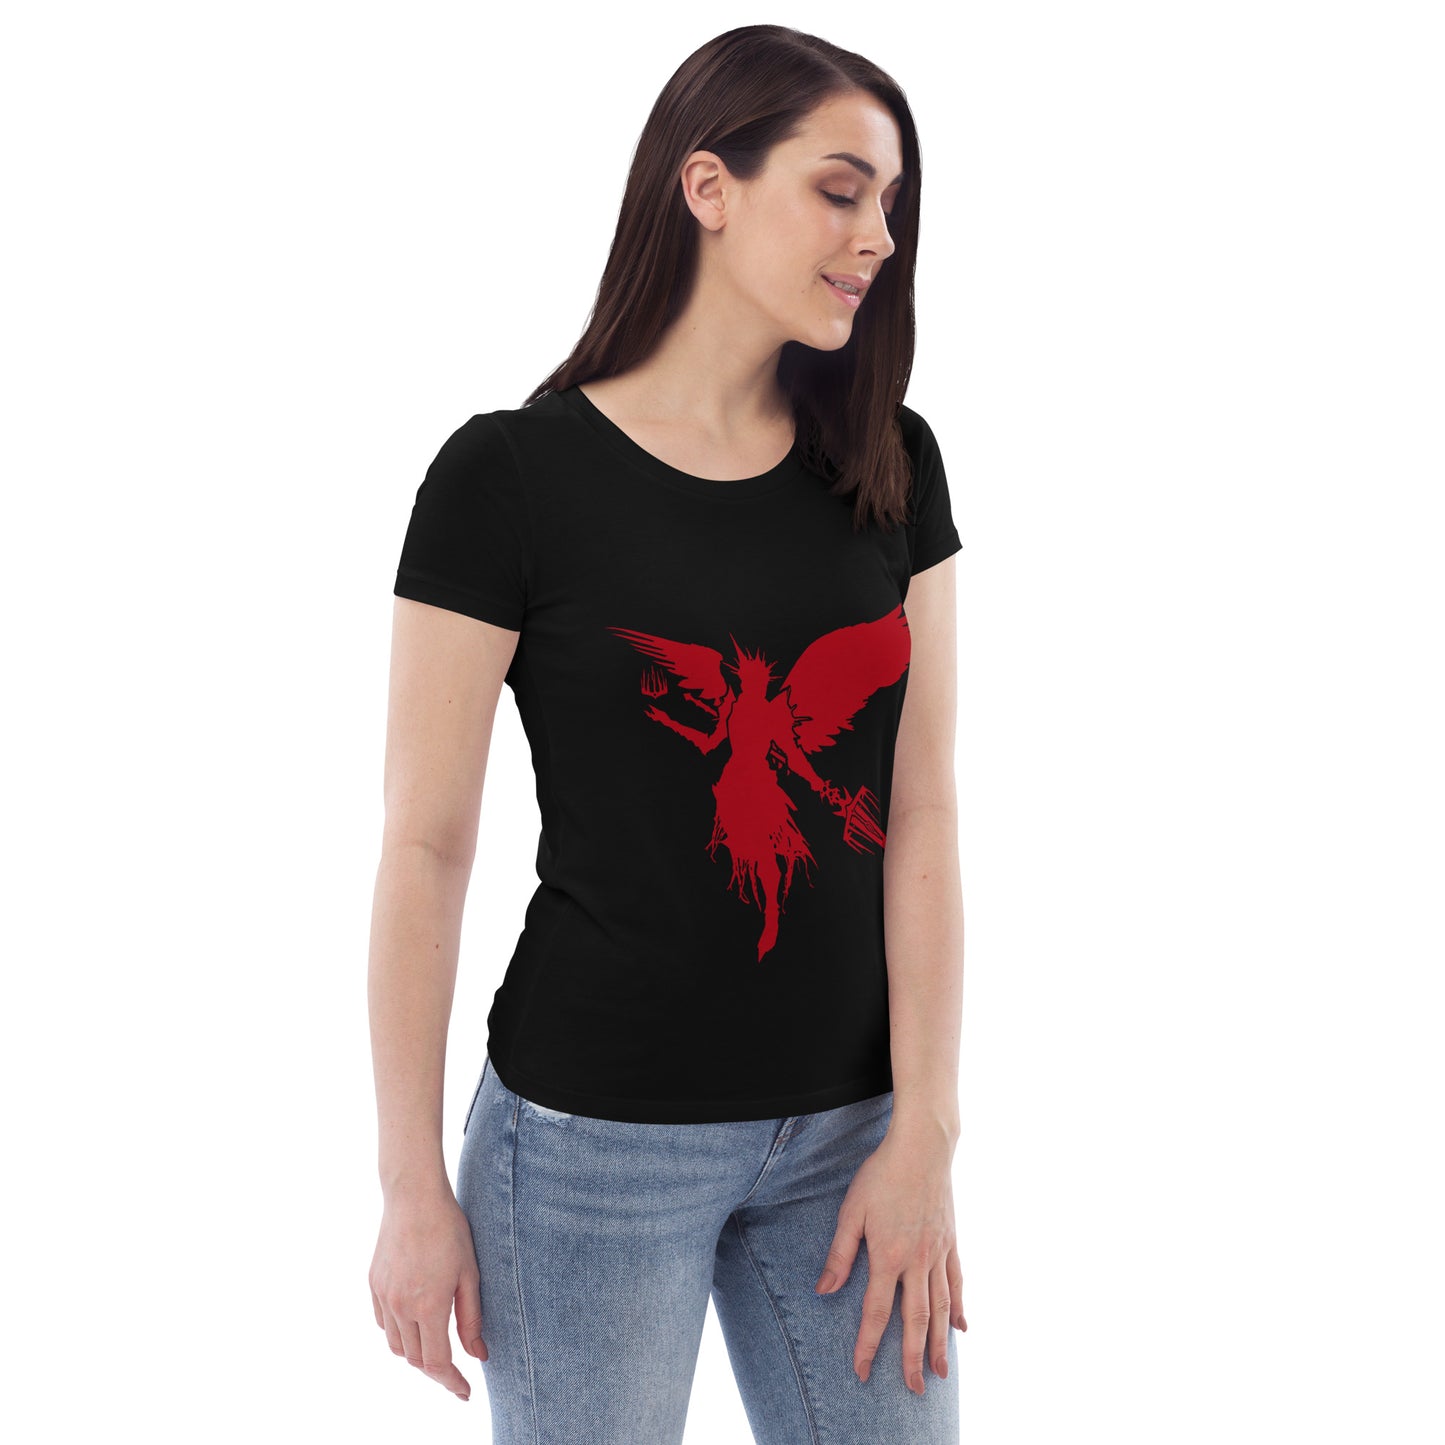 Wraith Eco Women's fitted eco tee